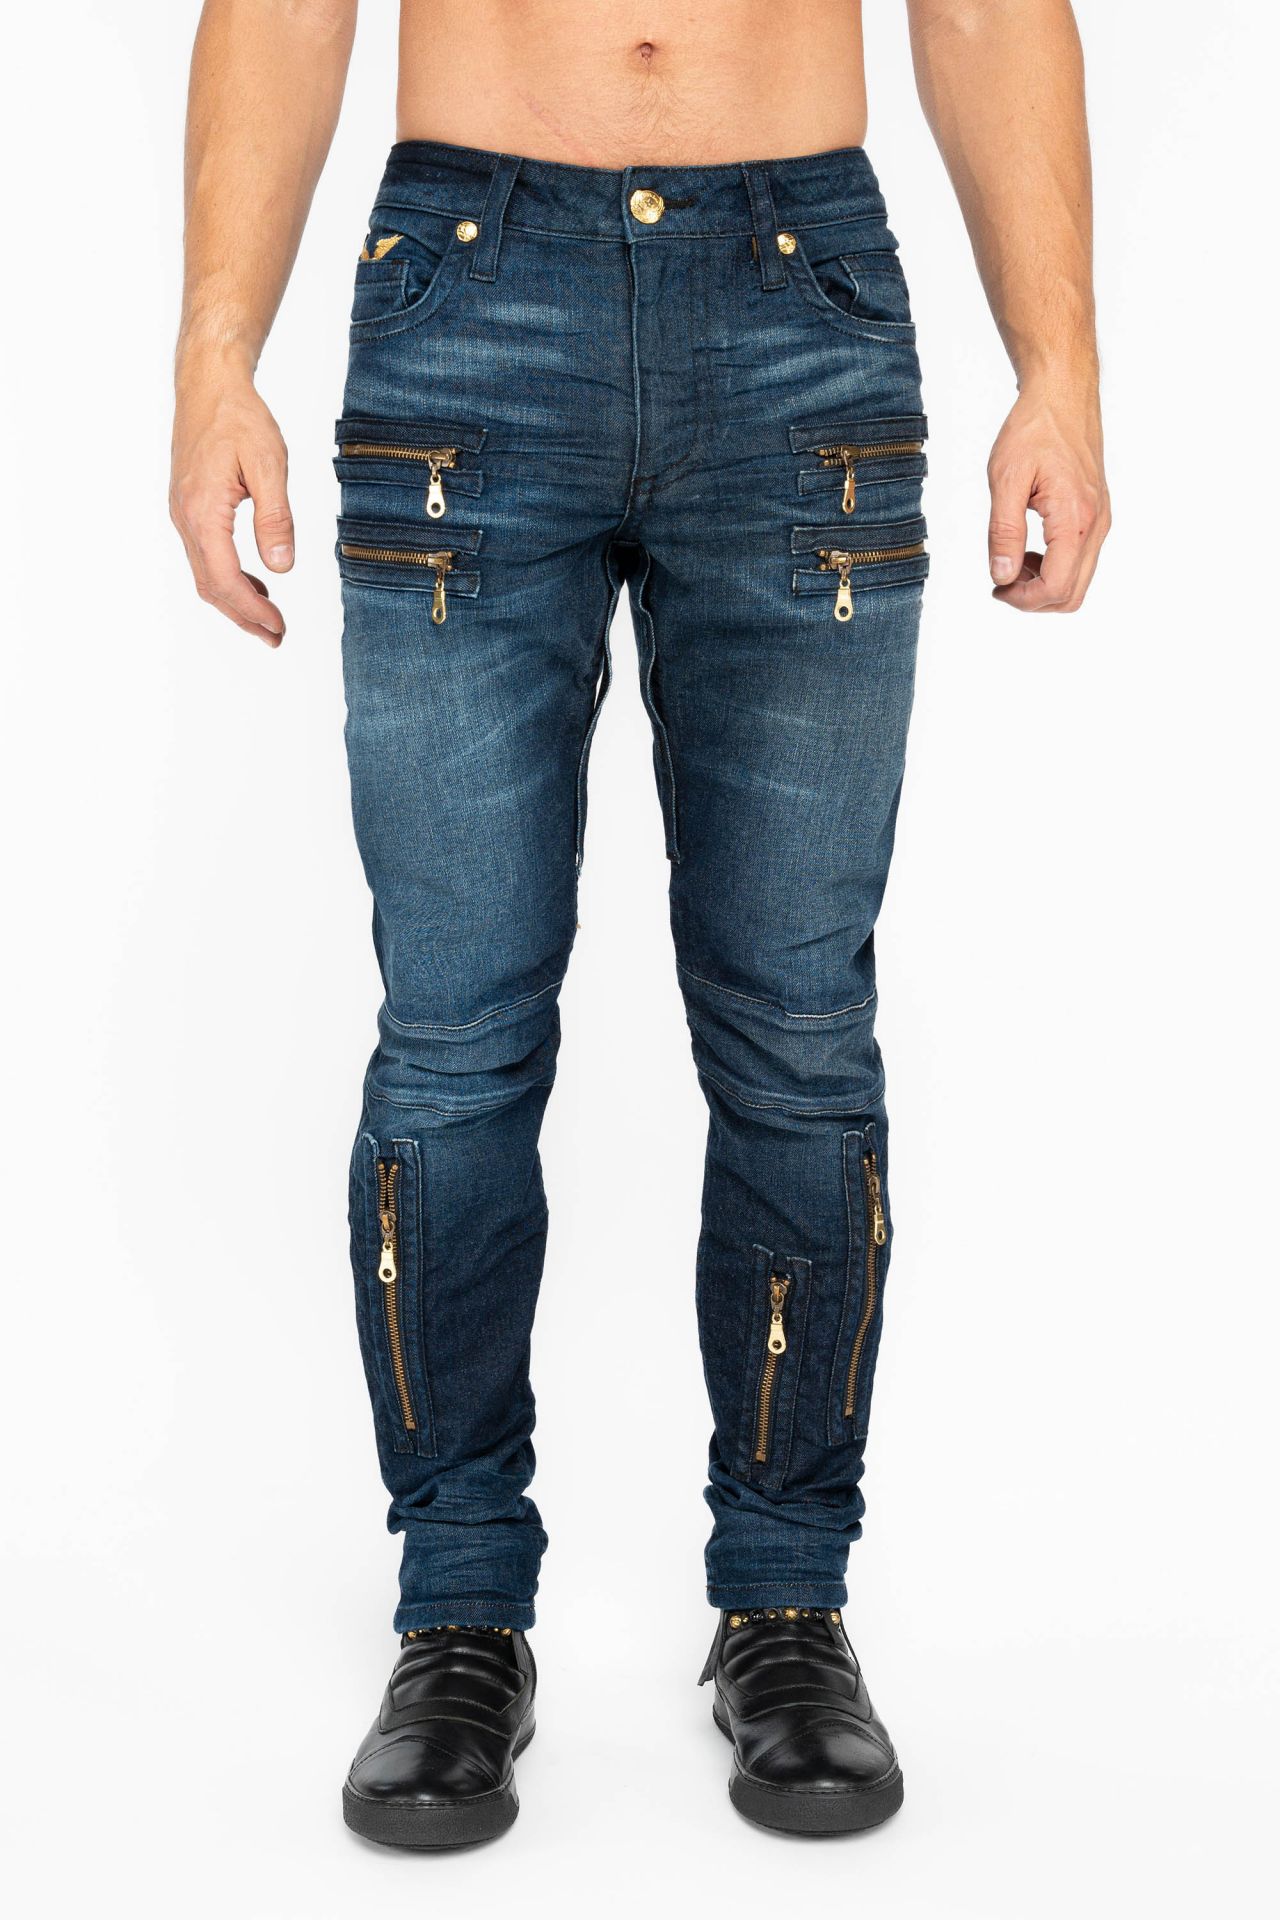 MENS NEW BIKER SKINNY JEANS IN LIBERTY DARK BLUE WITH GOLD WINGS